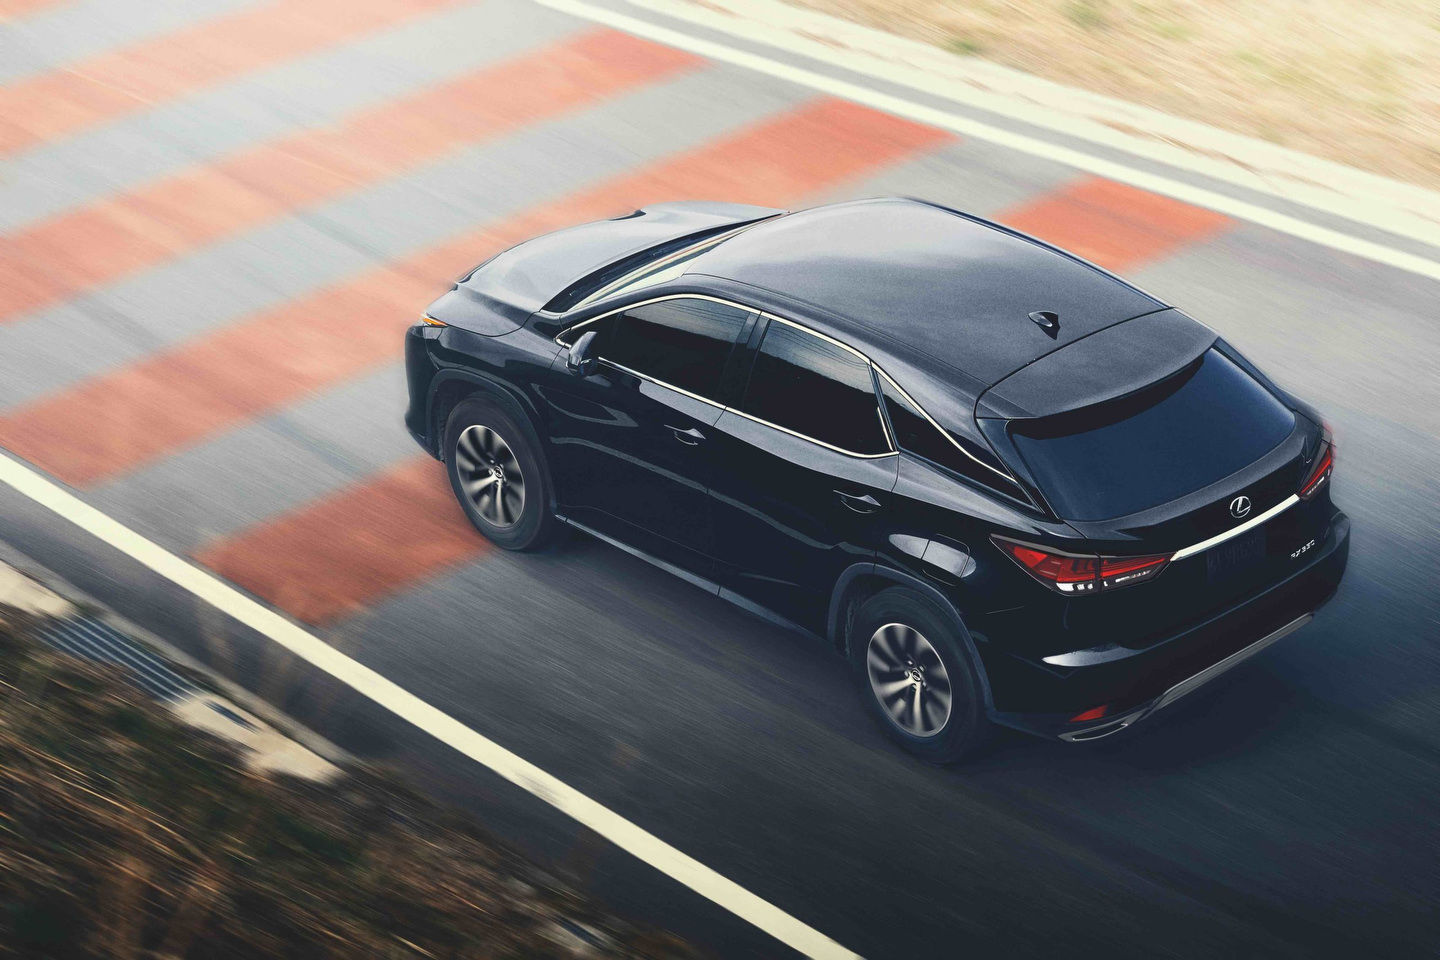 Three things that stand out about the 2022 Lexus RX